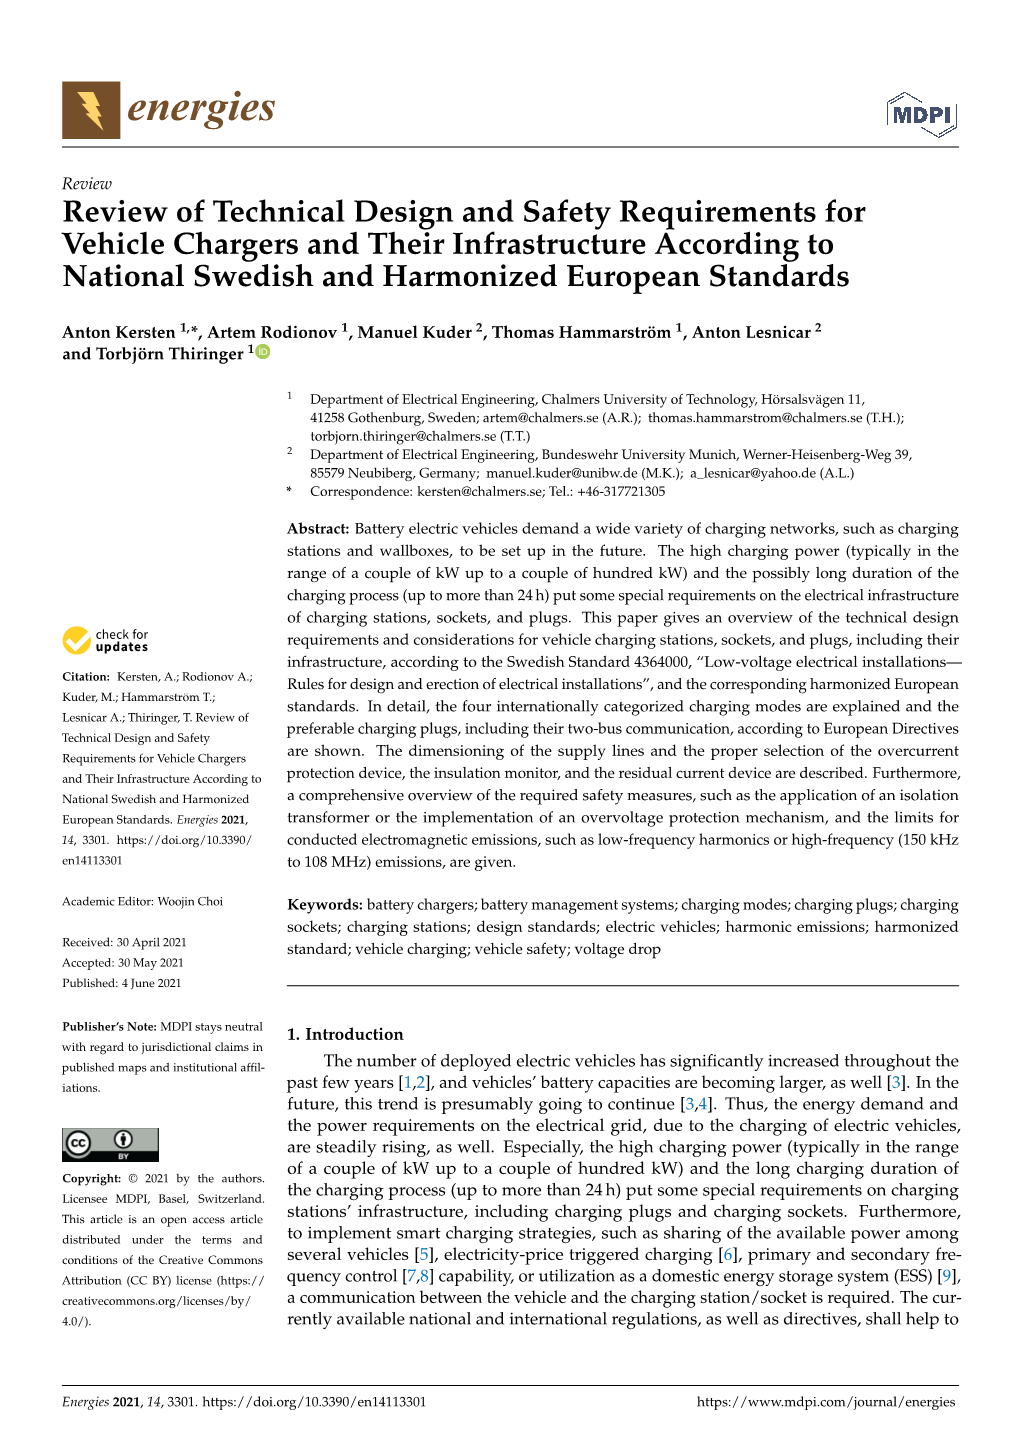 Review of Technical Design and Safety Requirements for Vehicle Chargers and Their Infrastructure According to National Swedish and Harmonized European Standards